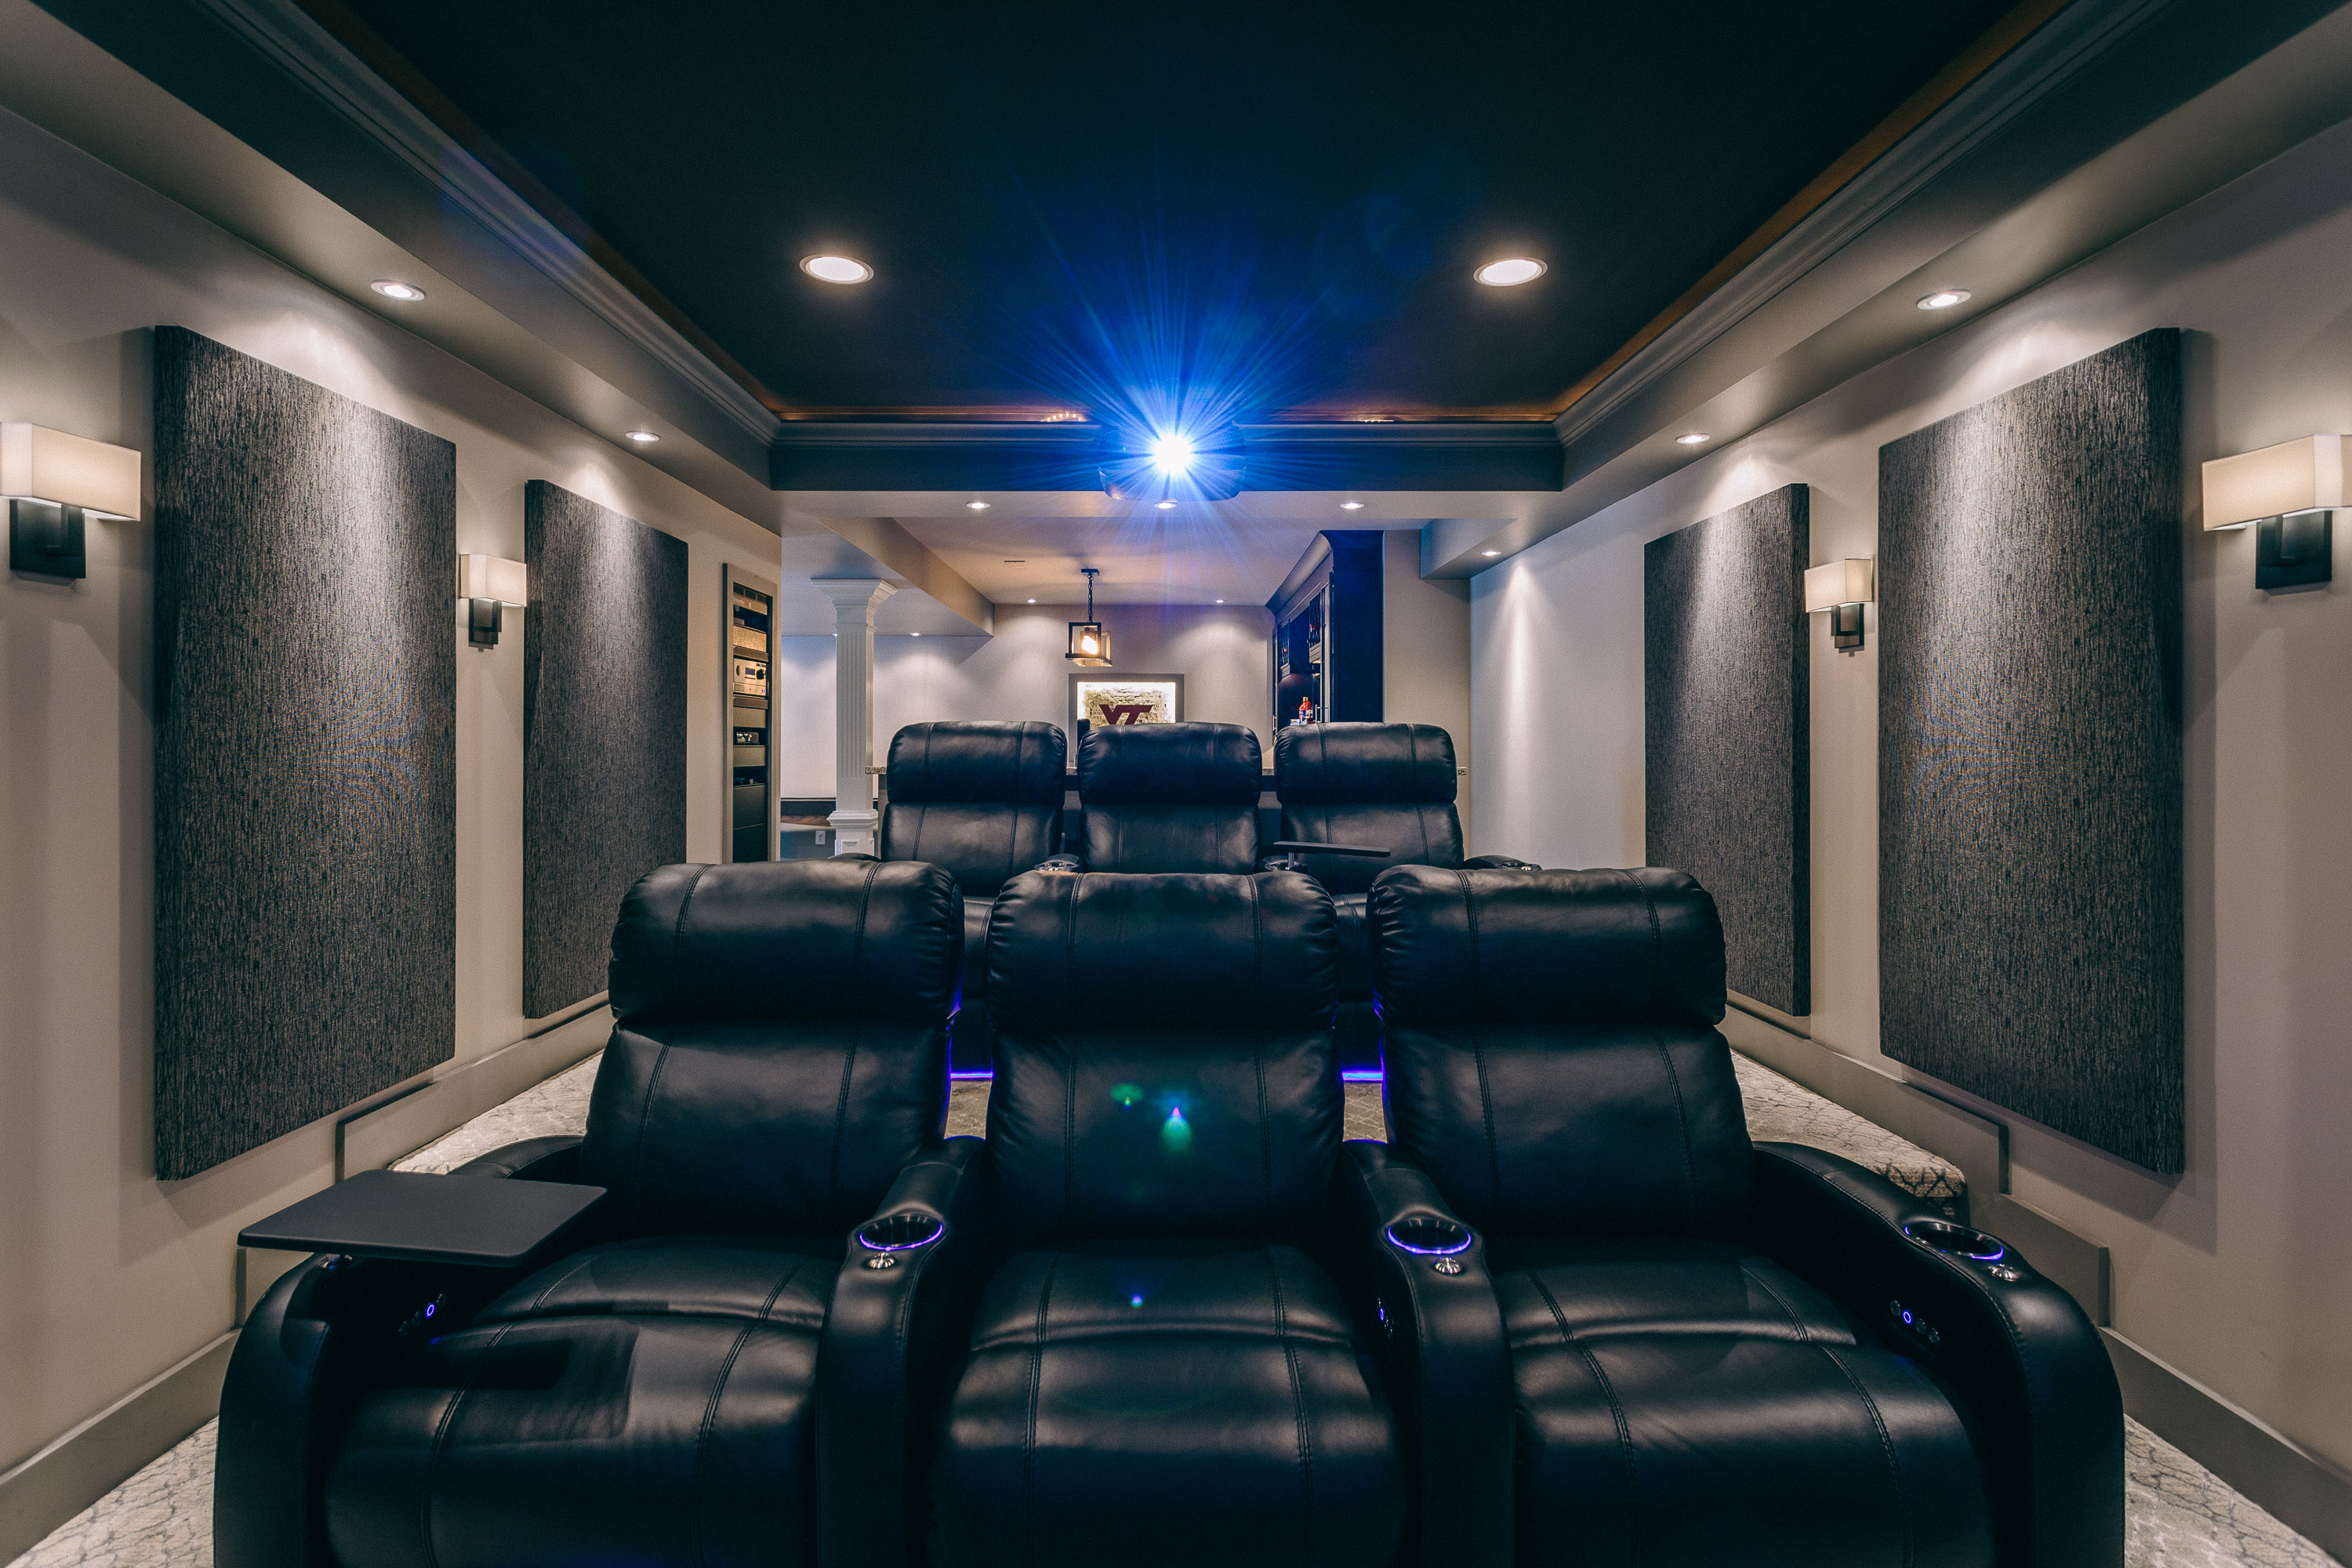 Projector and Seats